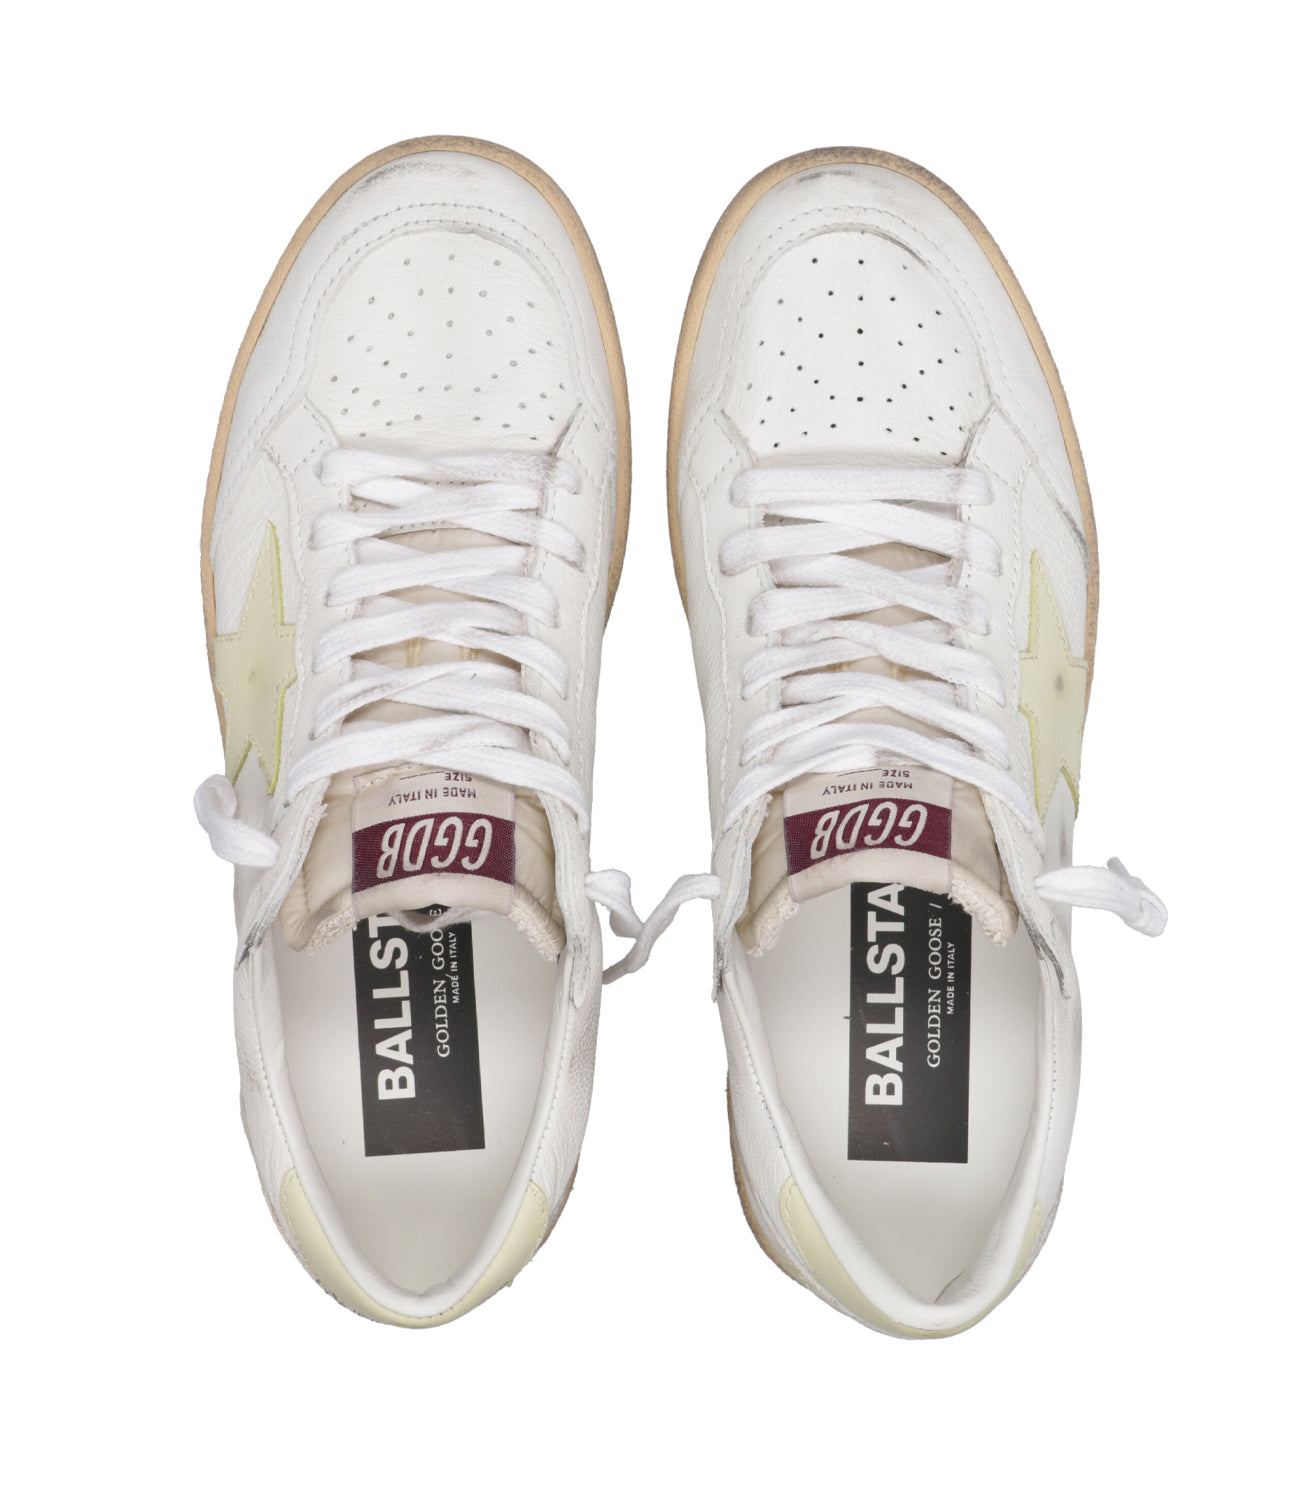 Golden Goose | Ballstar Sneakers White and Yellow